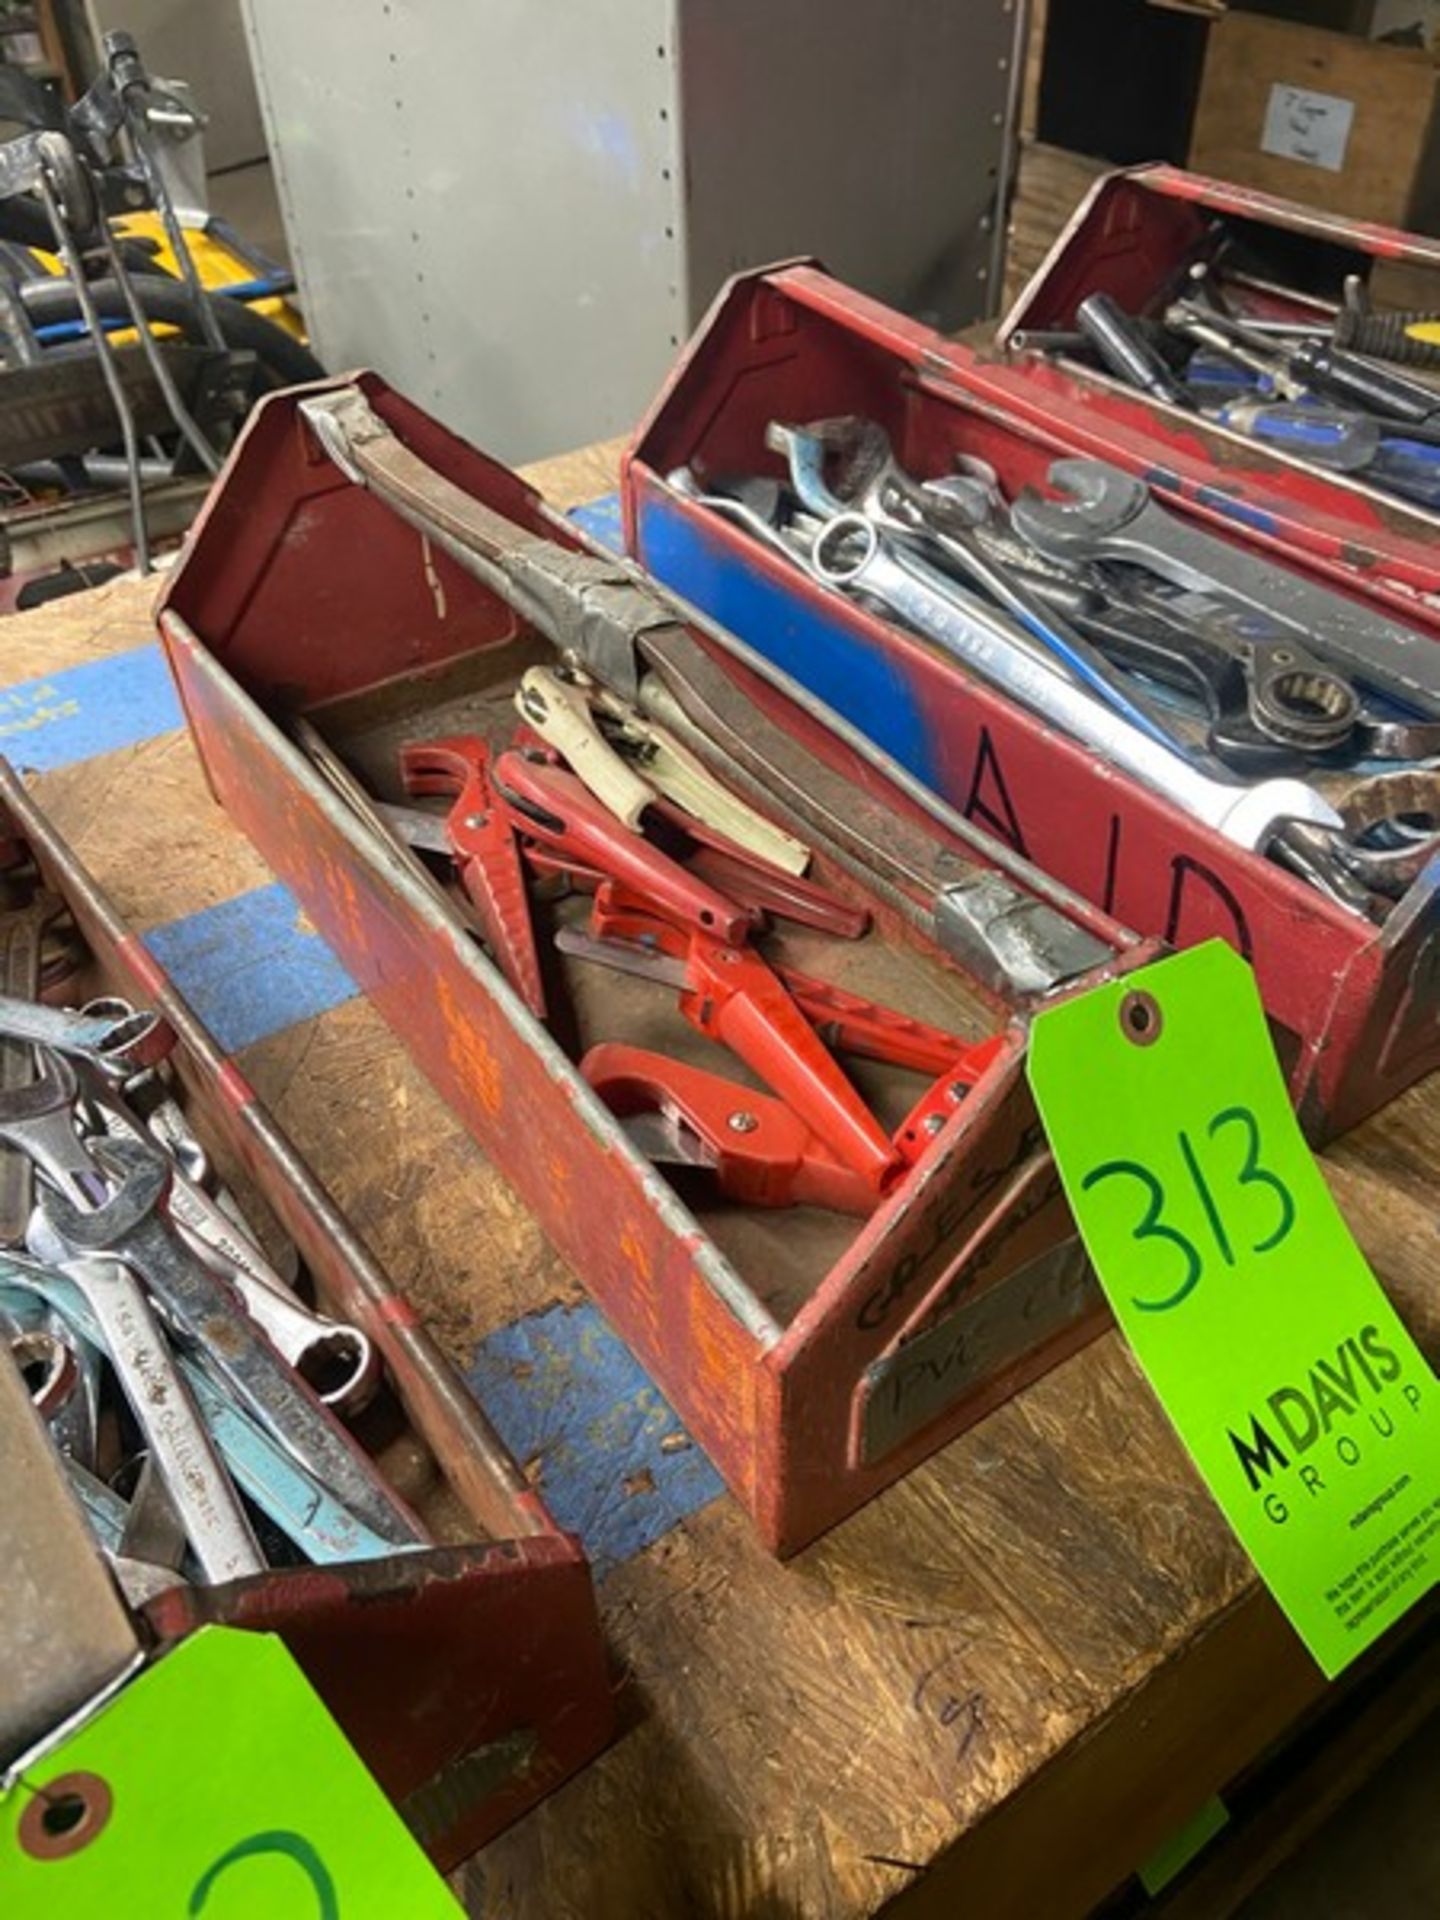 Assortment of PVC Cutters, Includes Toolbox (LOCATED IN MONROEVILLE, PA)